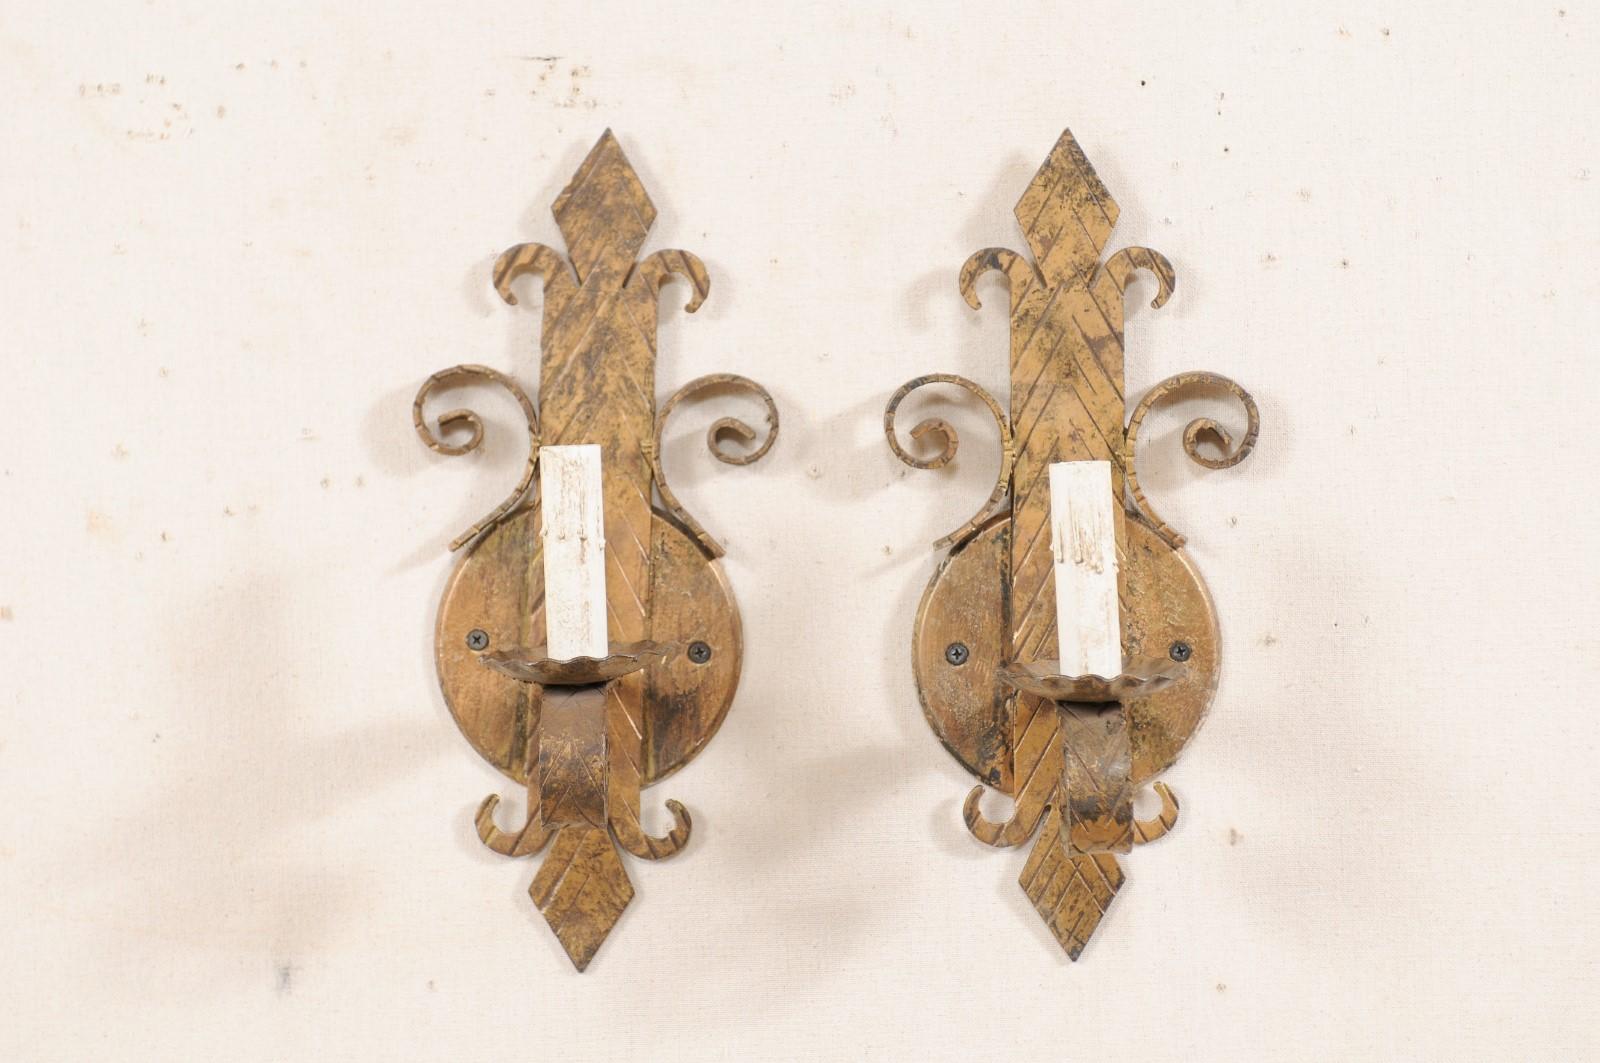 A pair of Spanish gold-tone iron sconces from the mid-20th century. This vintage pair of sconces from Spain each feature a stylized fleur-de-lys body with a single arm extending out into a downward curl, supporting a ruffled iron bobèche and painted